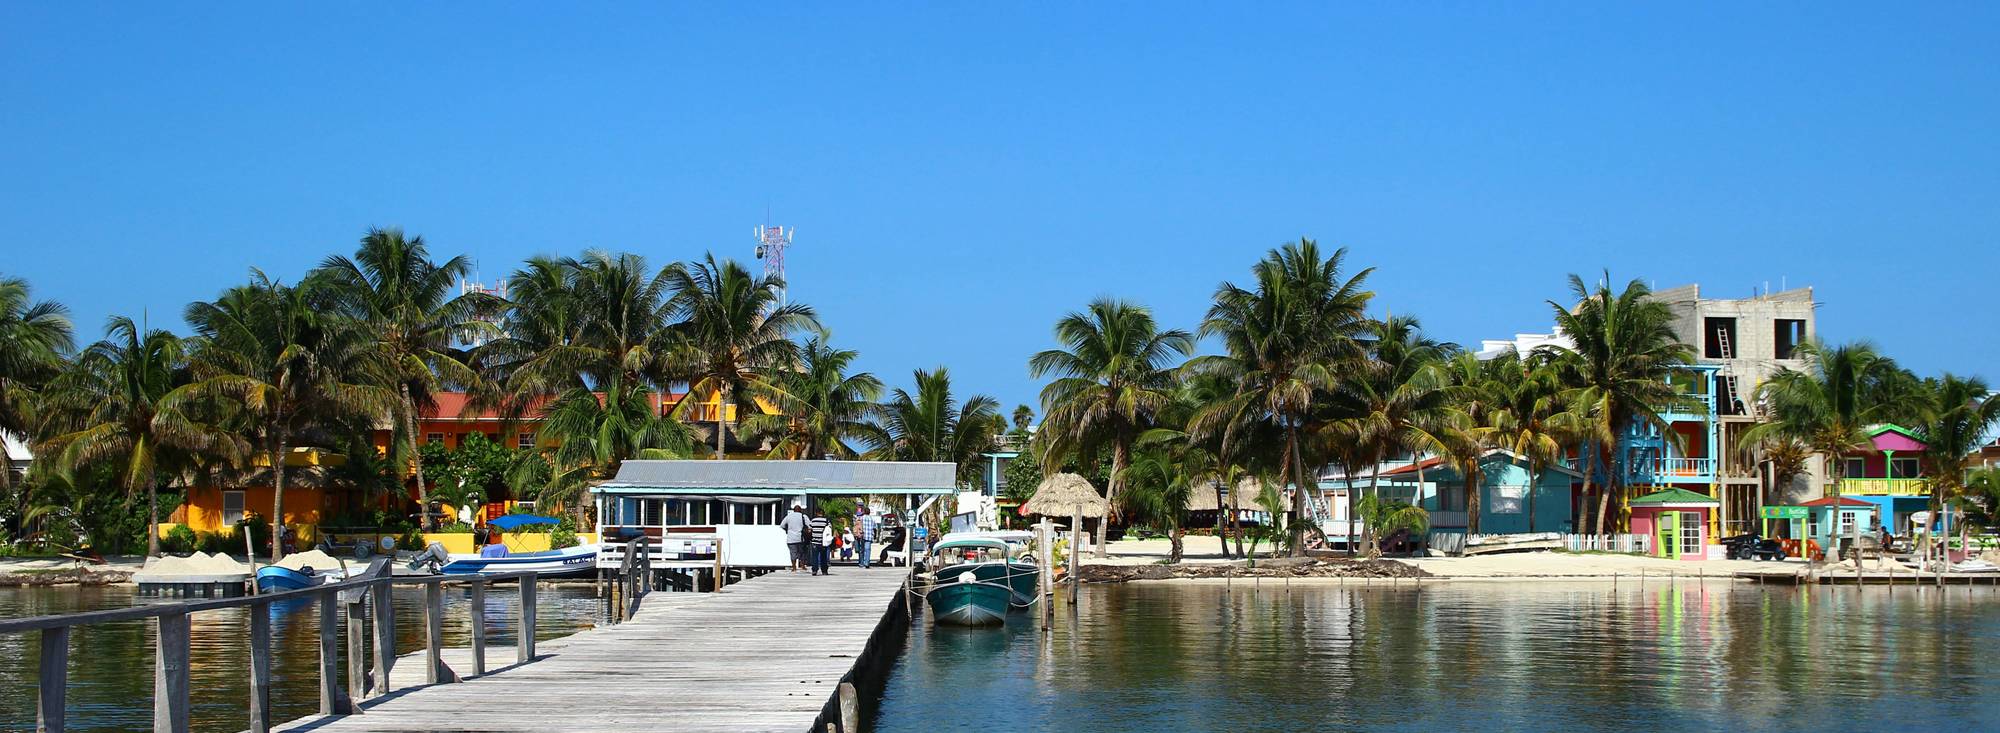 The Top 5 Places to Visit in Belize